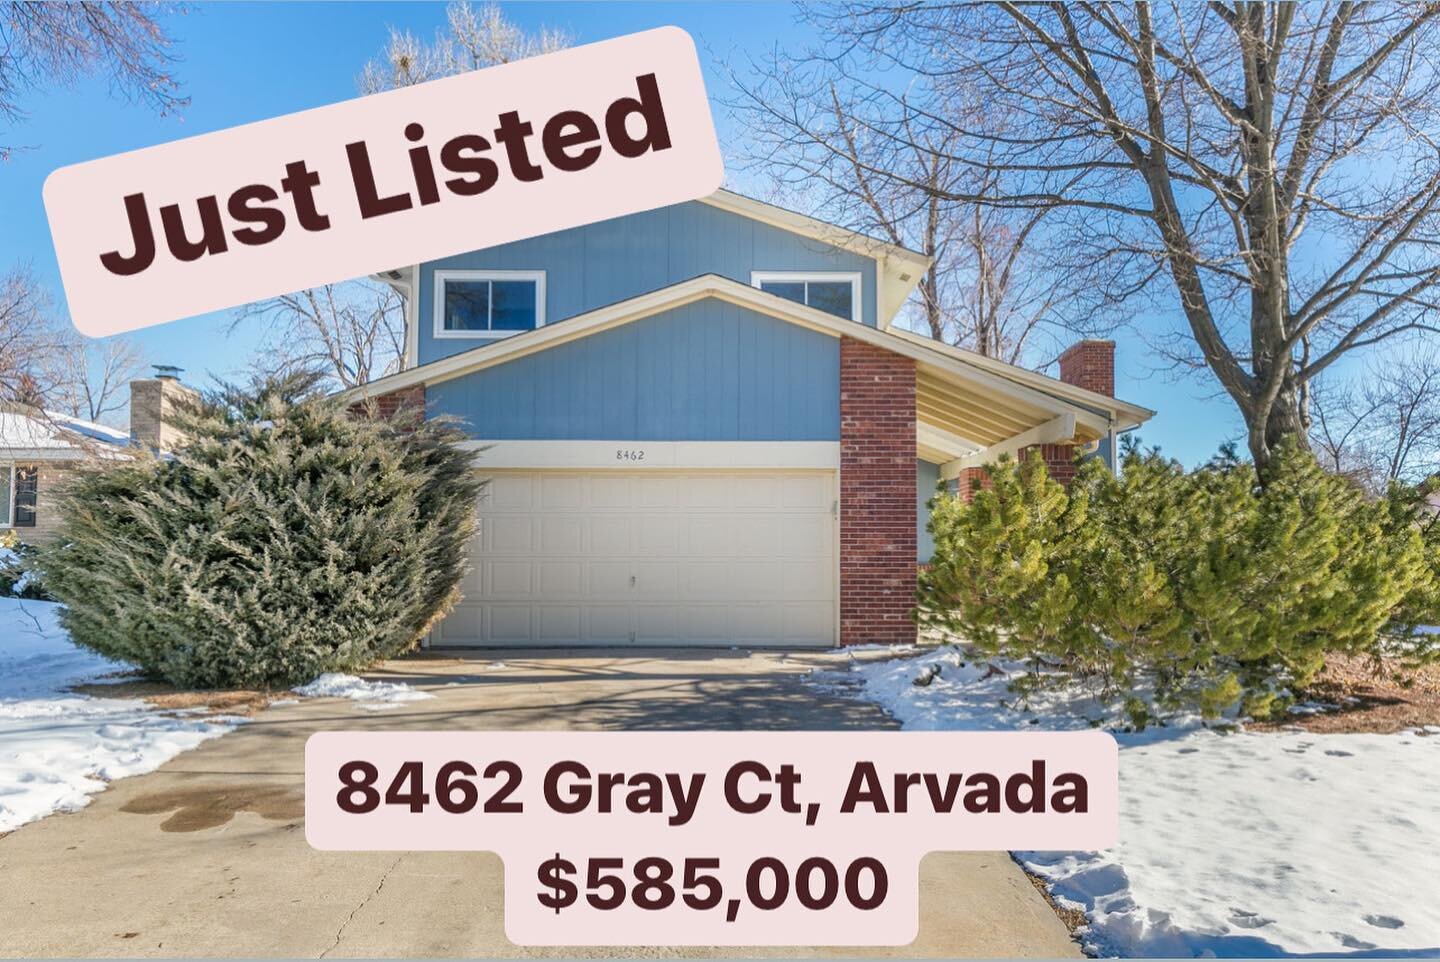 Just listed in Arvada - check out this beautifully updated 3 bed/2.5 bath home with a huge yard on a super quiet street that&rsquo;s close to schools, trails, shopping and commuting. DM us to come see it for yourself!

#riceandstrausteam #arvadacolor